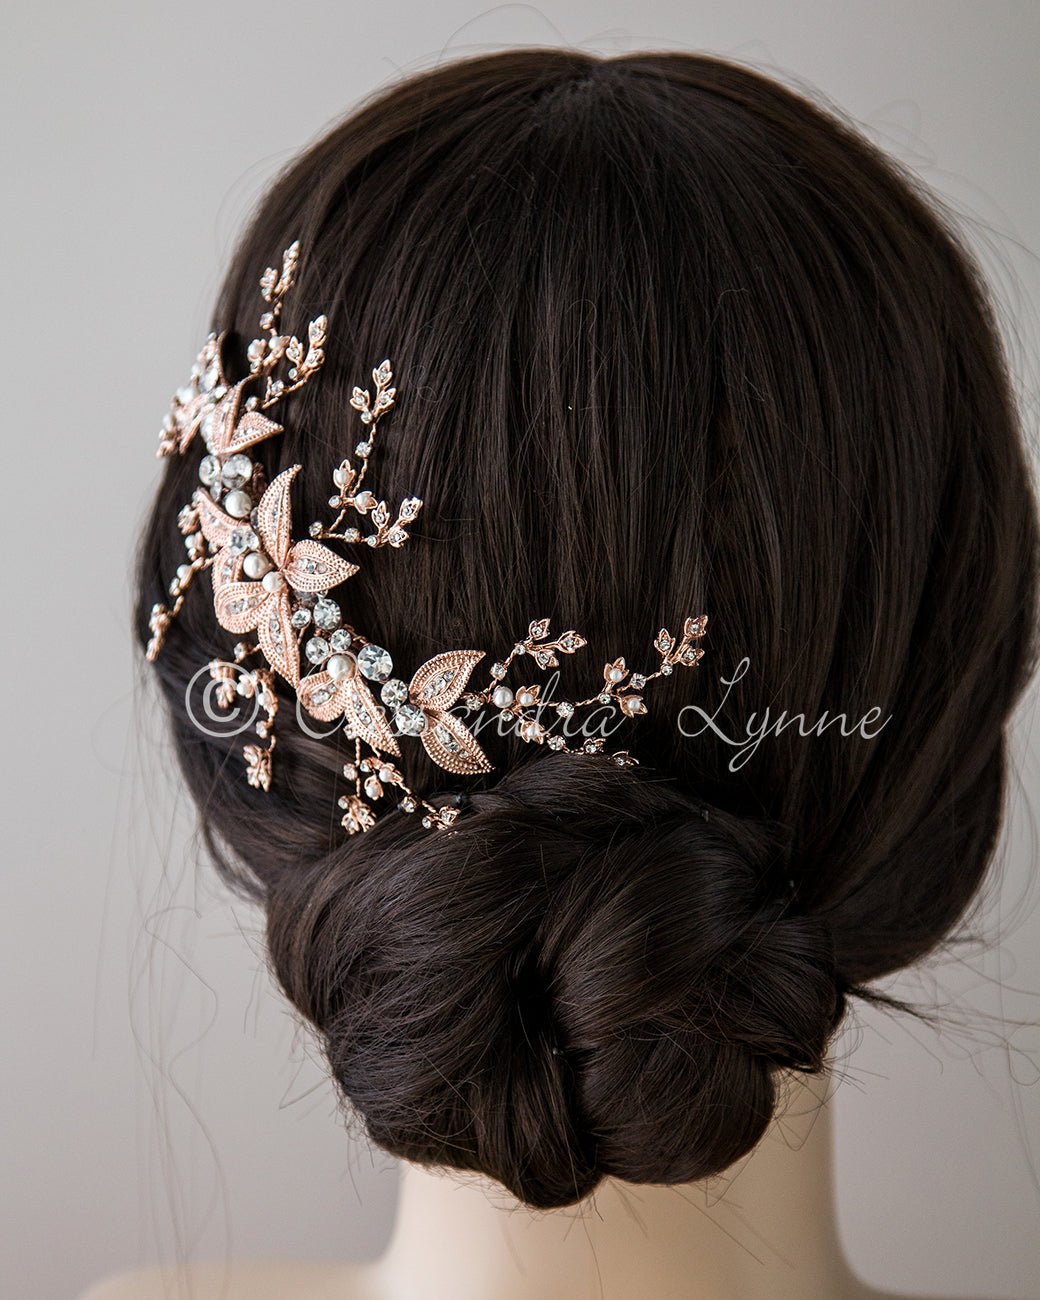 Comb Bridal Headpiece with Ivory Pearls - Cassandra Lynne